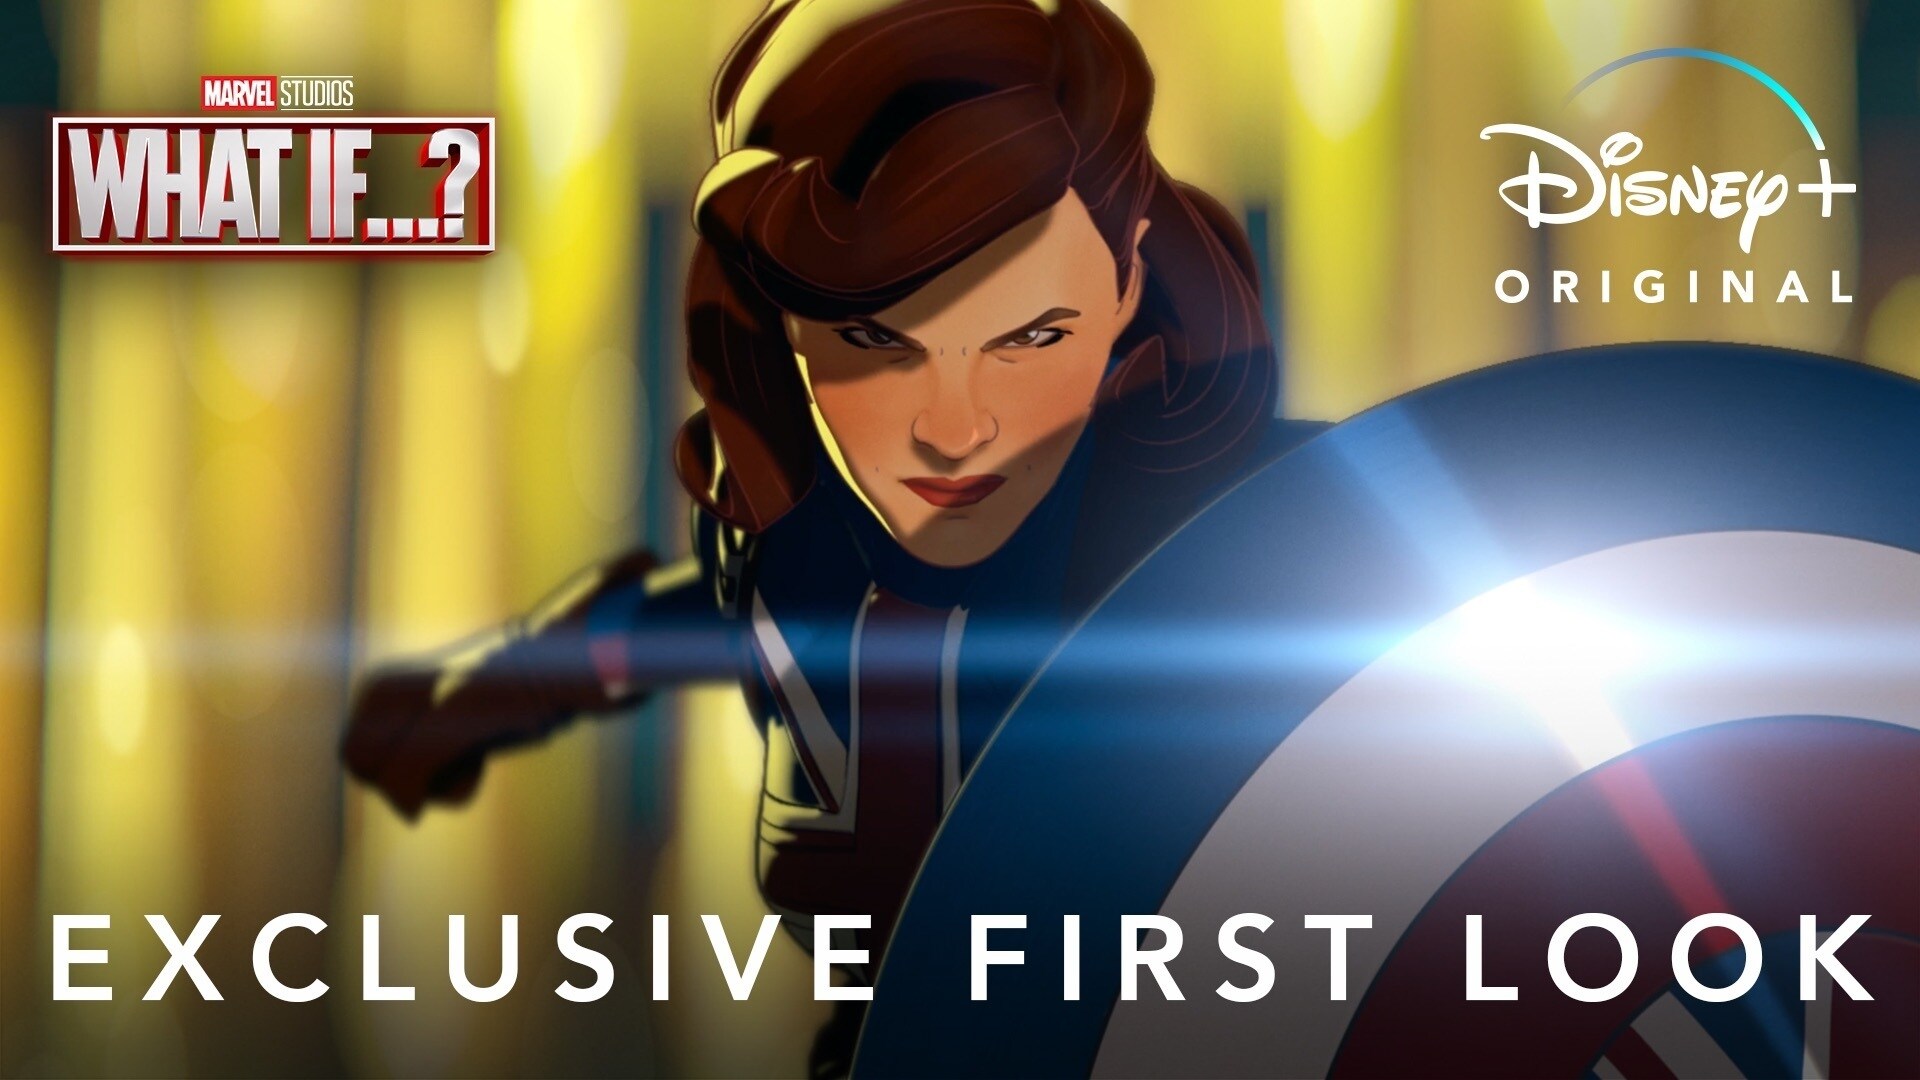 Exclusive First Look | What If…? | Disney+